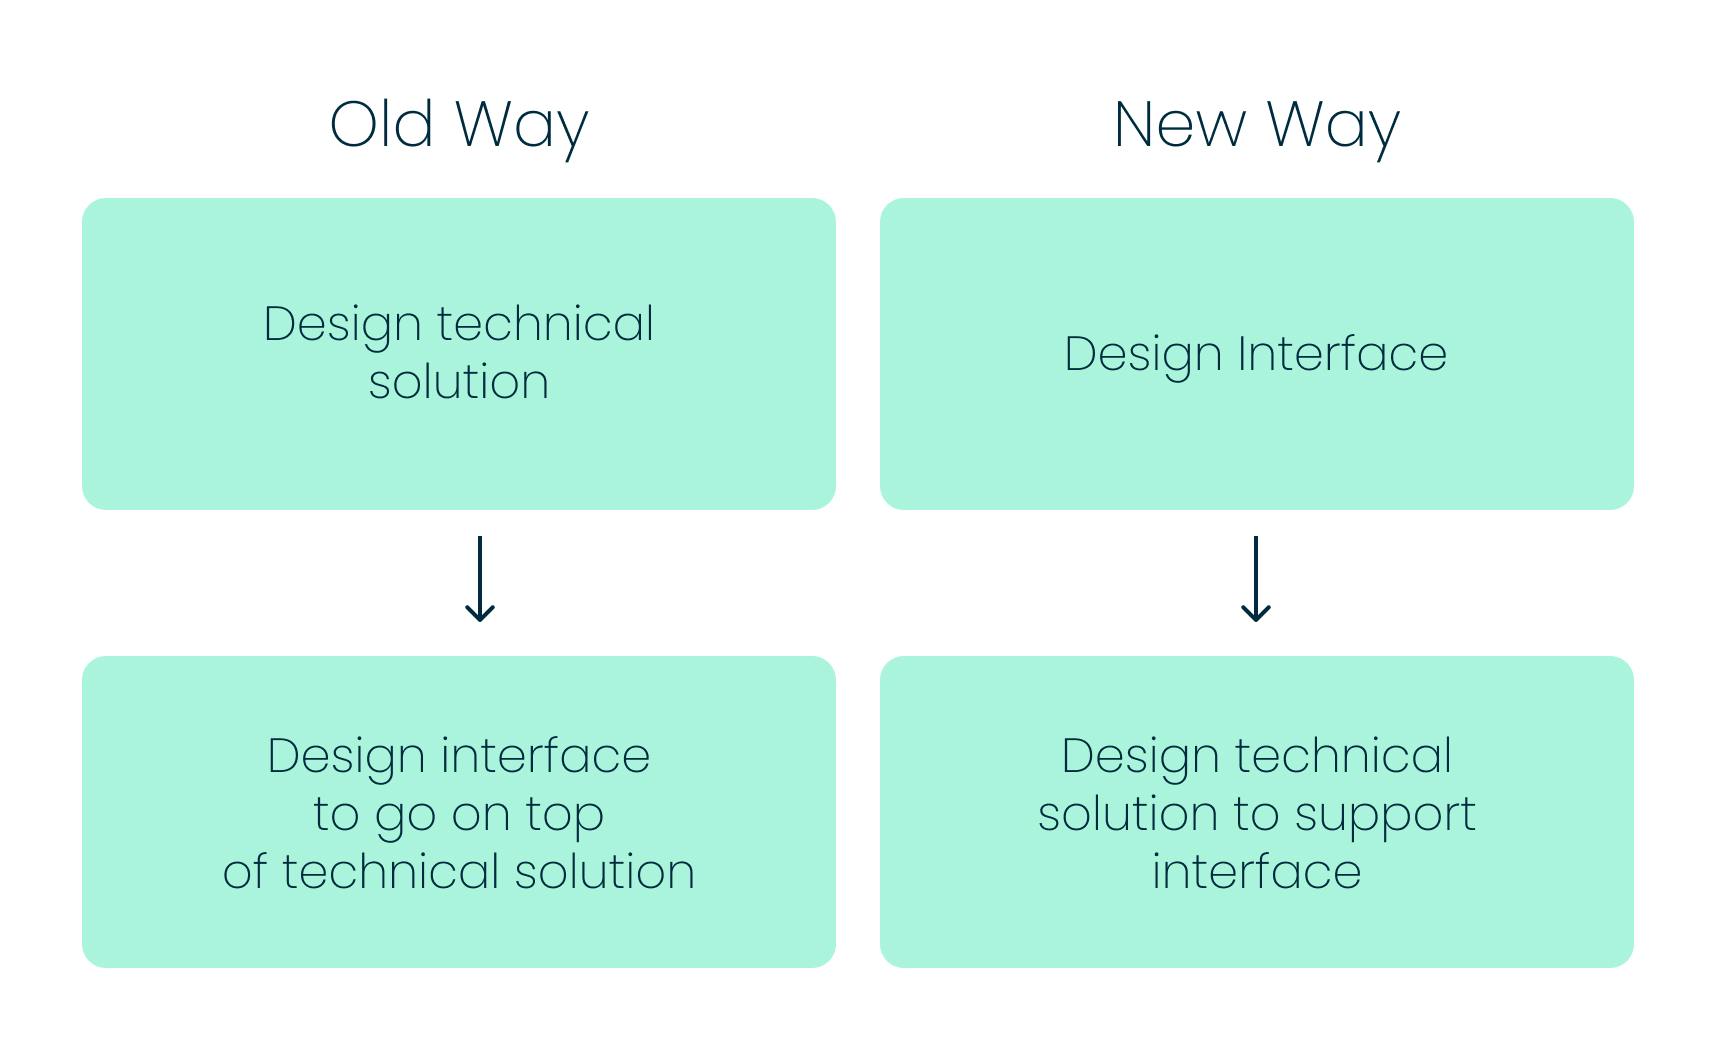 Flowchart of the old way of designing intranets (interface goes on top of technical solution) vs. new way (design technical solution to support interface)